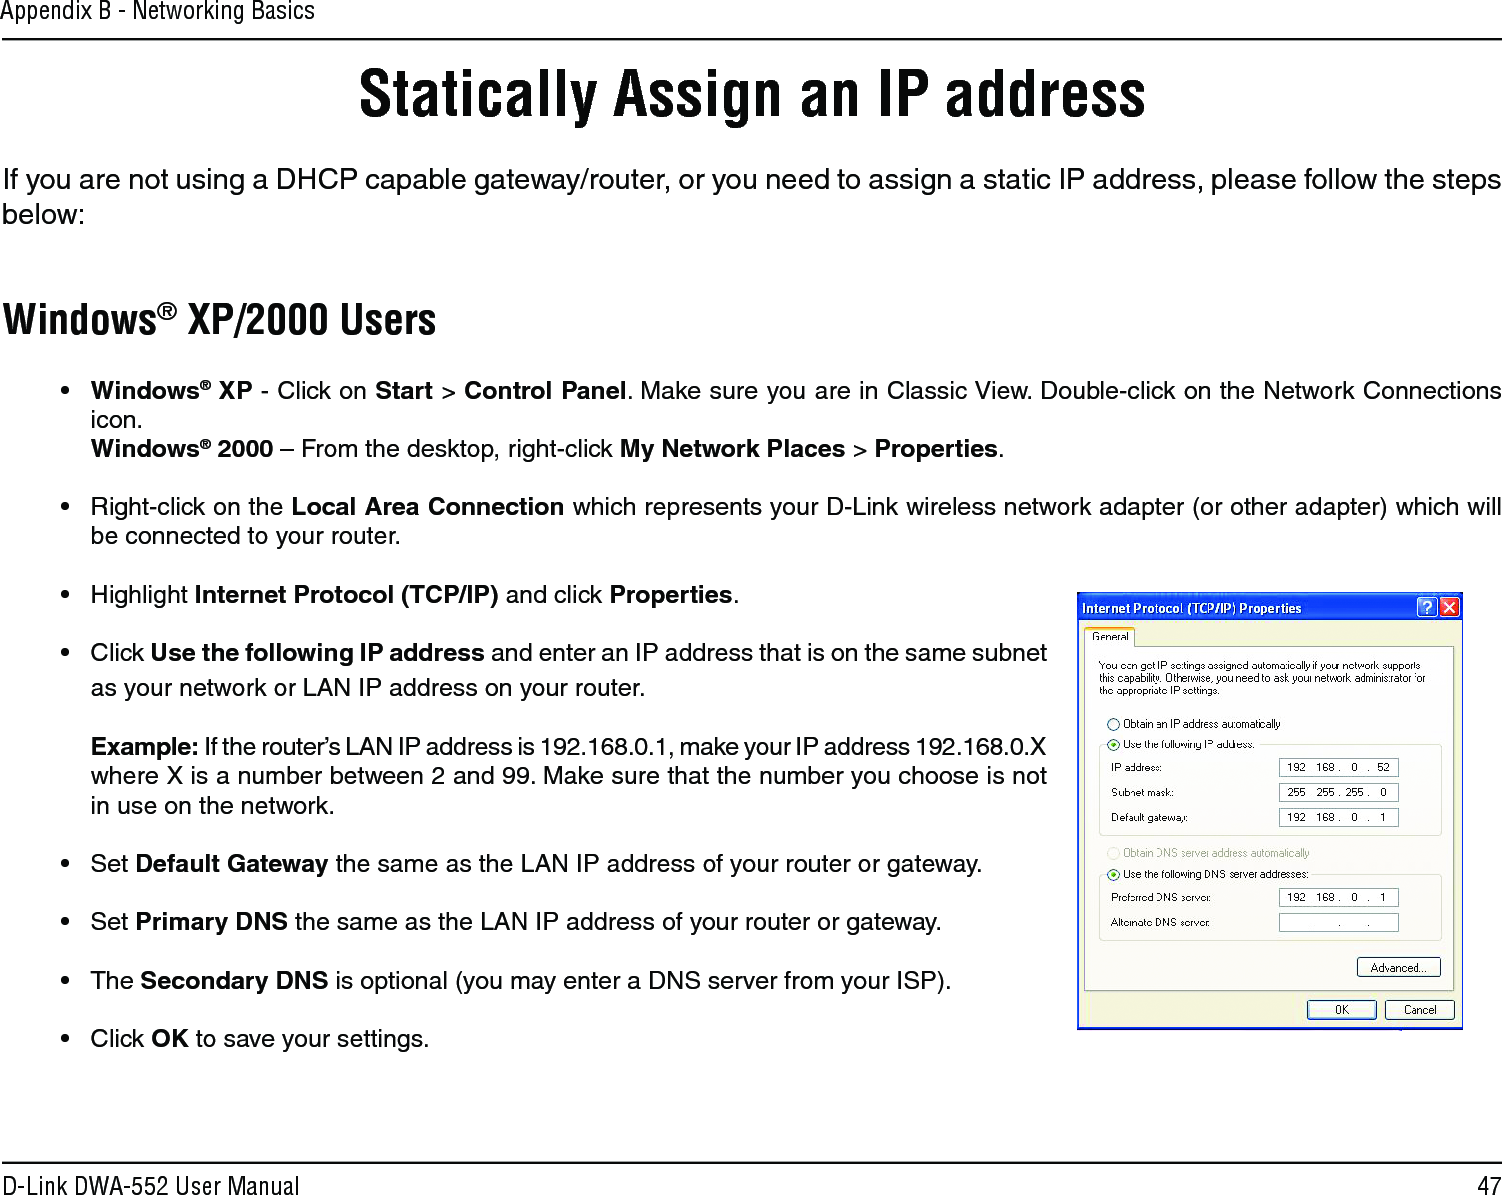 47D-Link DWA-552 User ManualAppendix B - Networking BasicsStatically Assign an IP addressIf you are not using a DHCP capable gateway/router, or you need to assign a static IP address, please follow the steps below:Windows® XP/2000 Users•  Windows® XP - Click on Start &gt; Control Panel. Make sure you are in Classic View. Double-click on the Network Connections icon. Windows® 2000 – From the desktop, right-click My Network Places &gt; Properties.•  Right-click on the Local Area Connection which represents your D-Link wireless network adapter (or other adapter) which will be connected to your router.•  Highlight Internet Protocol (TCP/IP) and click Properties.•  Click Use the following IP address and enter an IP address that is on the same subnet as your network or LAN IP address on your router. Example: If the router’s LAN IP address is 192.168.0.1, make your IP address 192.168.0.X where X is a number between 2 and 99. Make sure that the number you choose is not in use on the network. •  Set Default Gateway the same as the LAN IP address of your router or gateway.•  Set Primary DNS the same as the LAN IP address of your router or gateway. •  The Secondary DNS is optional (you may enter a DNS server from your ISP).•  Click OK to save your settings.